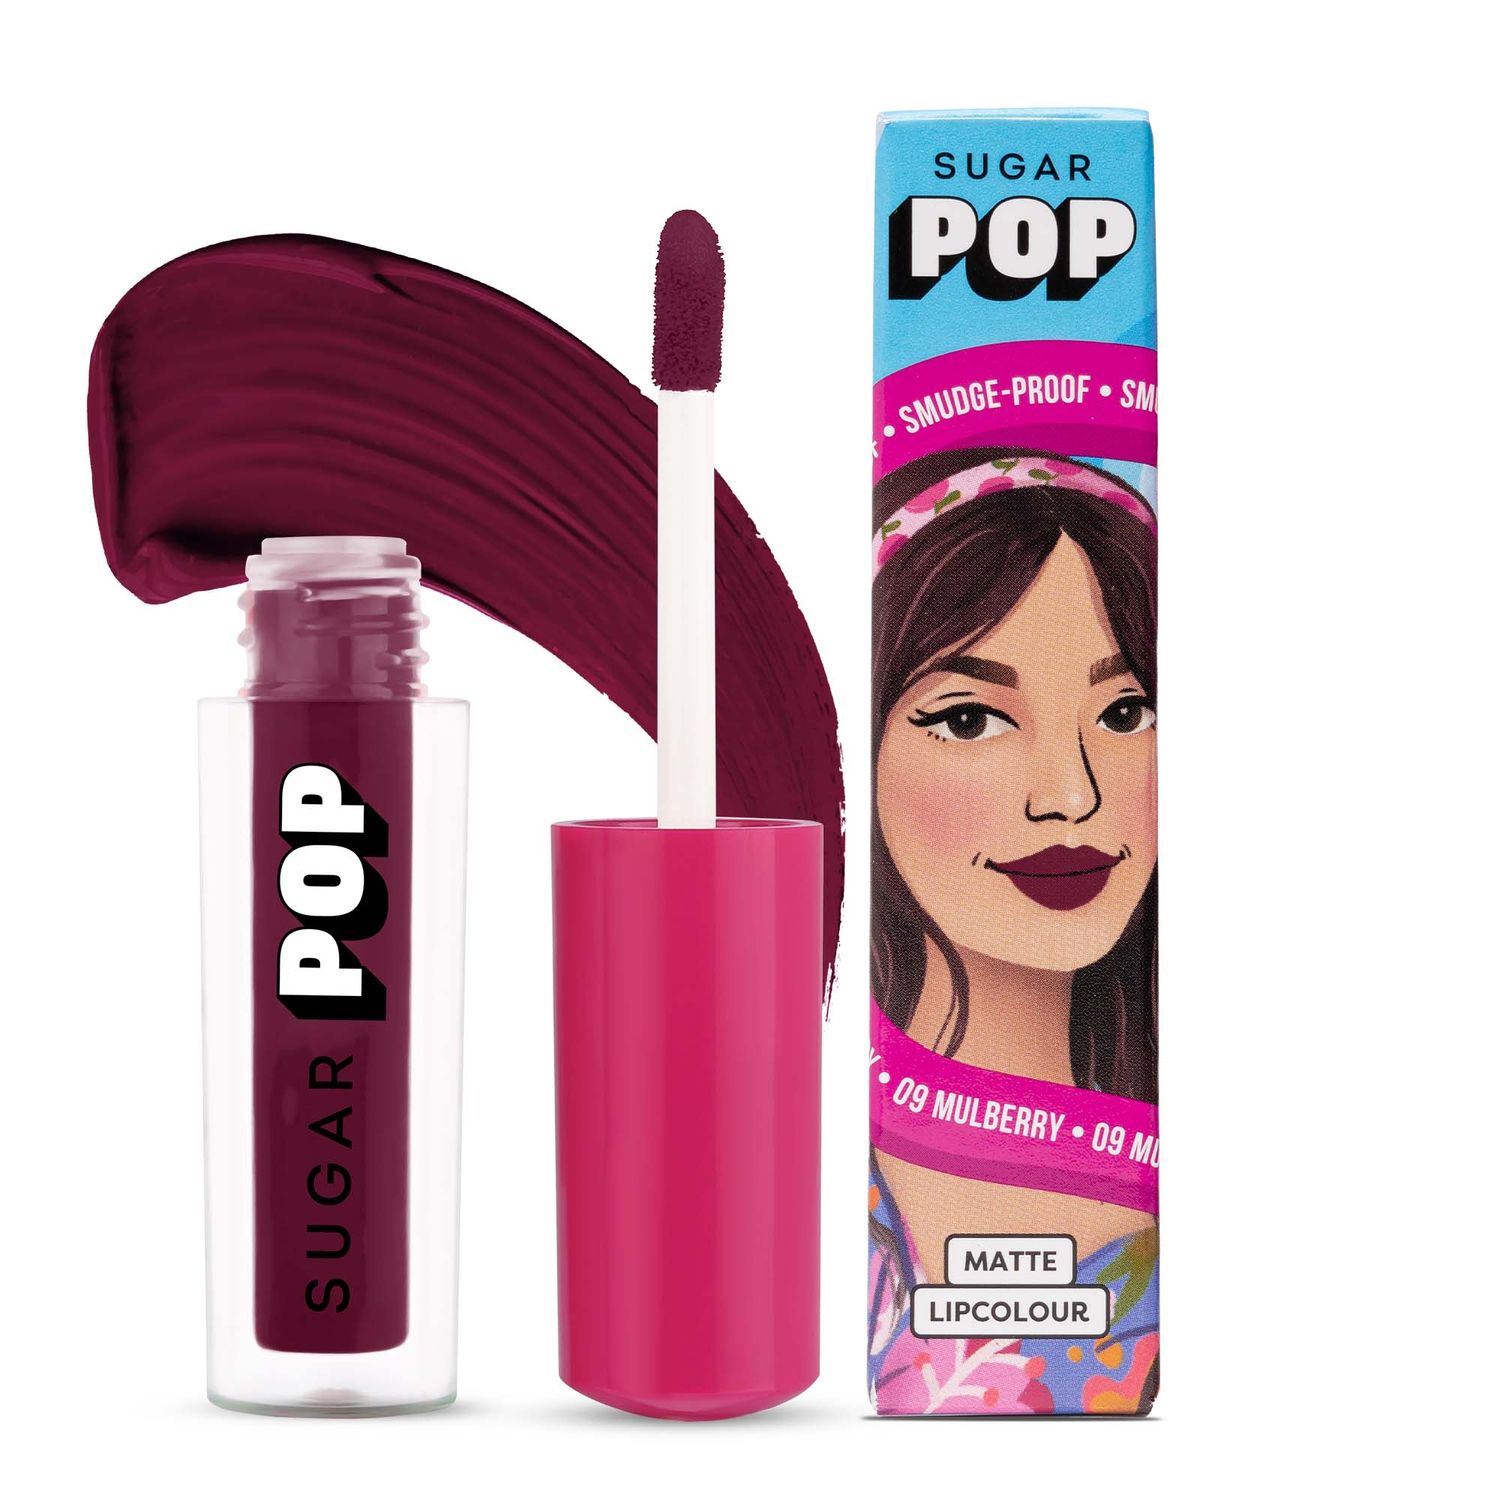 Buy SUGAR POP Matte Lipcolour - 09 Mulberry (Brownish Red) a€“ 1.6 ml - Red Lipstick for Women l  Smudge Proof - Purplle